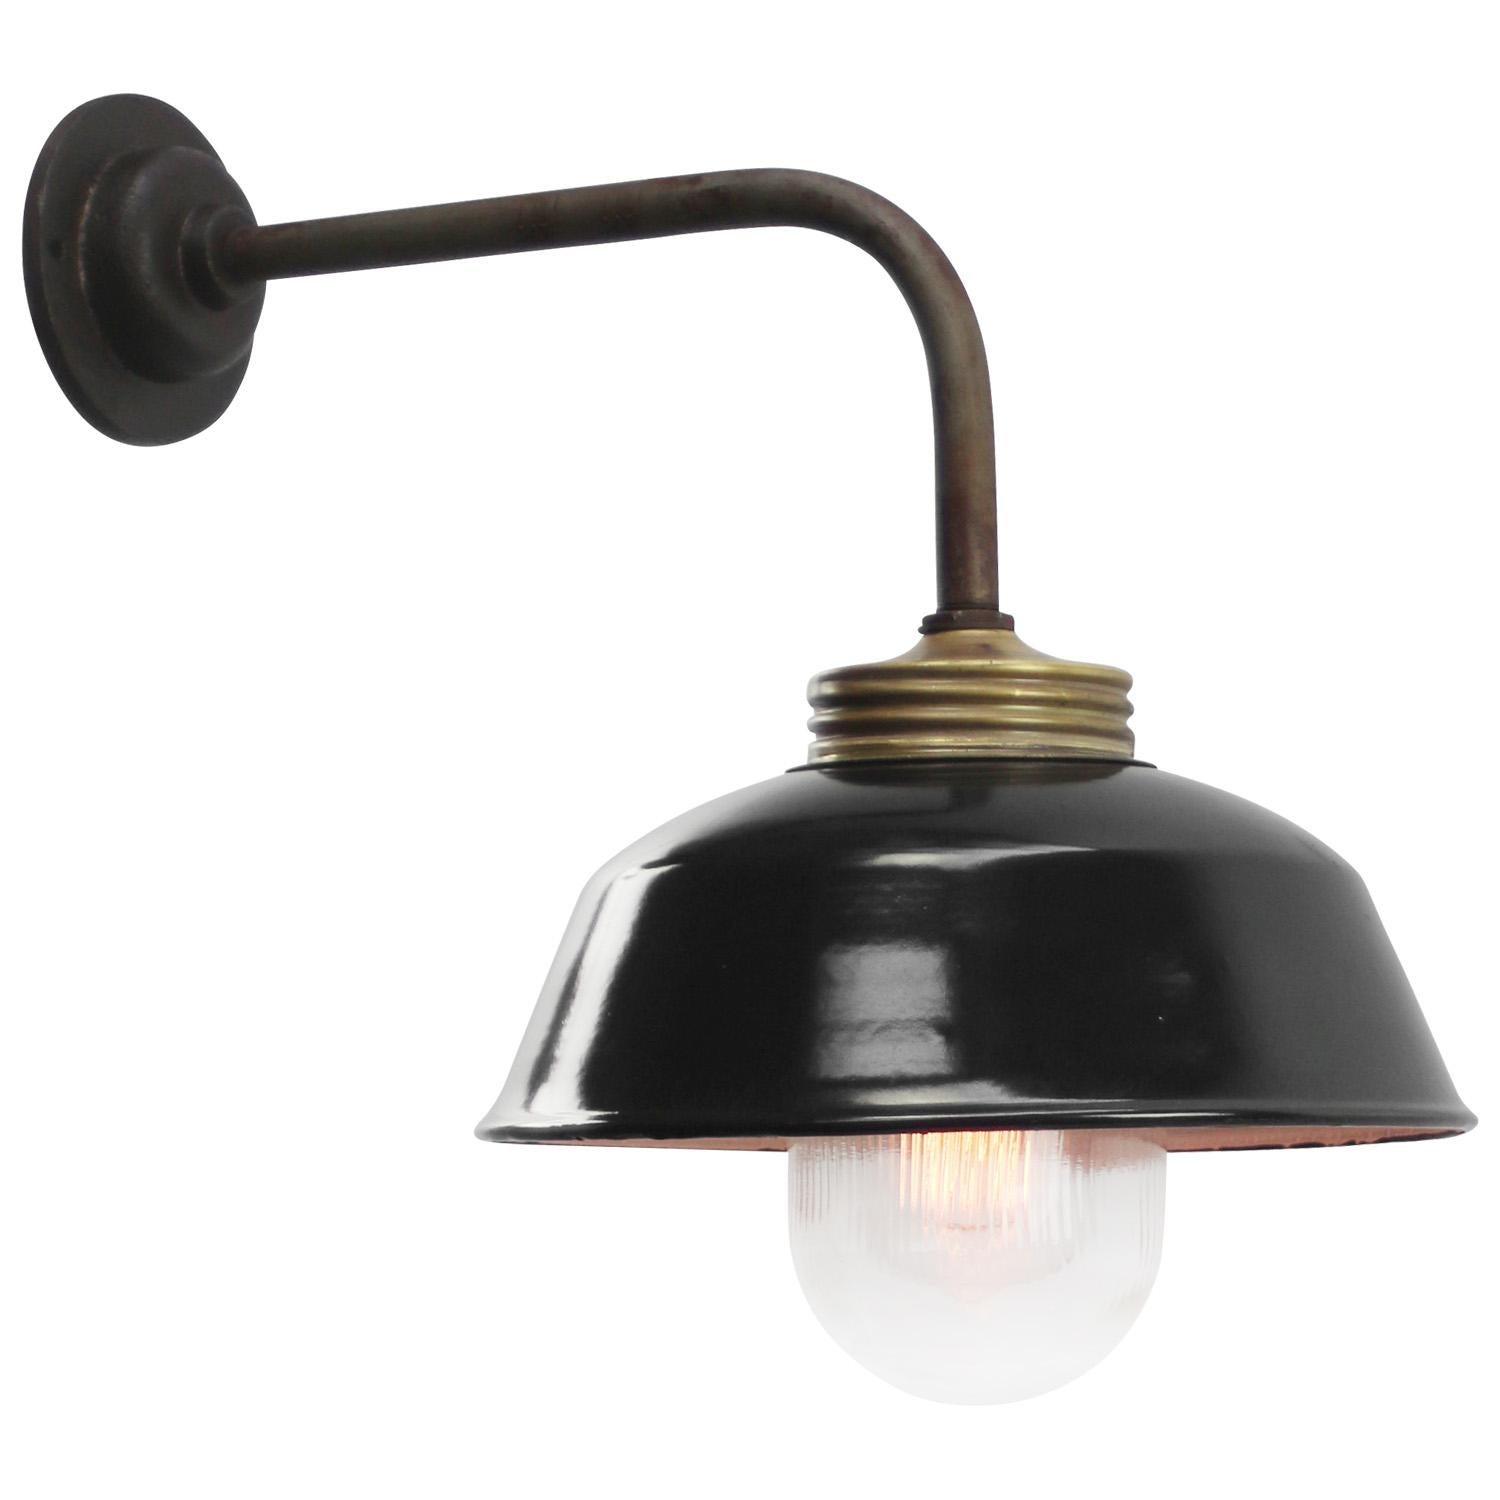 Rust Cast Iron Barn light
Black enamel shade, brass top, clear striped glass

Diameter cast iron wall piece: 10.5 cm / 4 inches
2 holes to secure

Weight: 2.00 kg / 4.4 lb

Priced per individual item. All lamps have been made suitable by